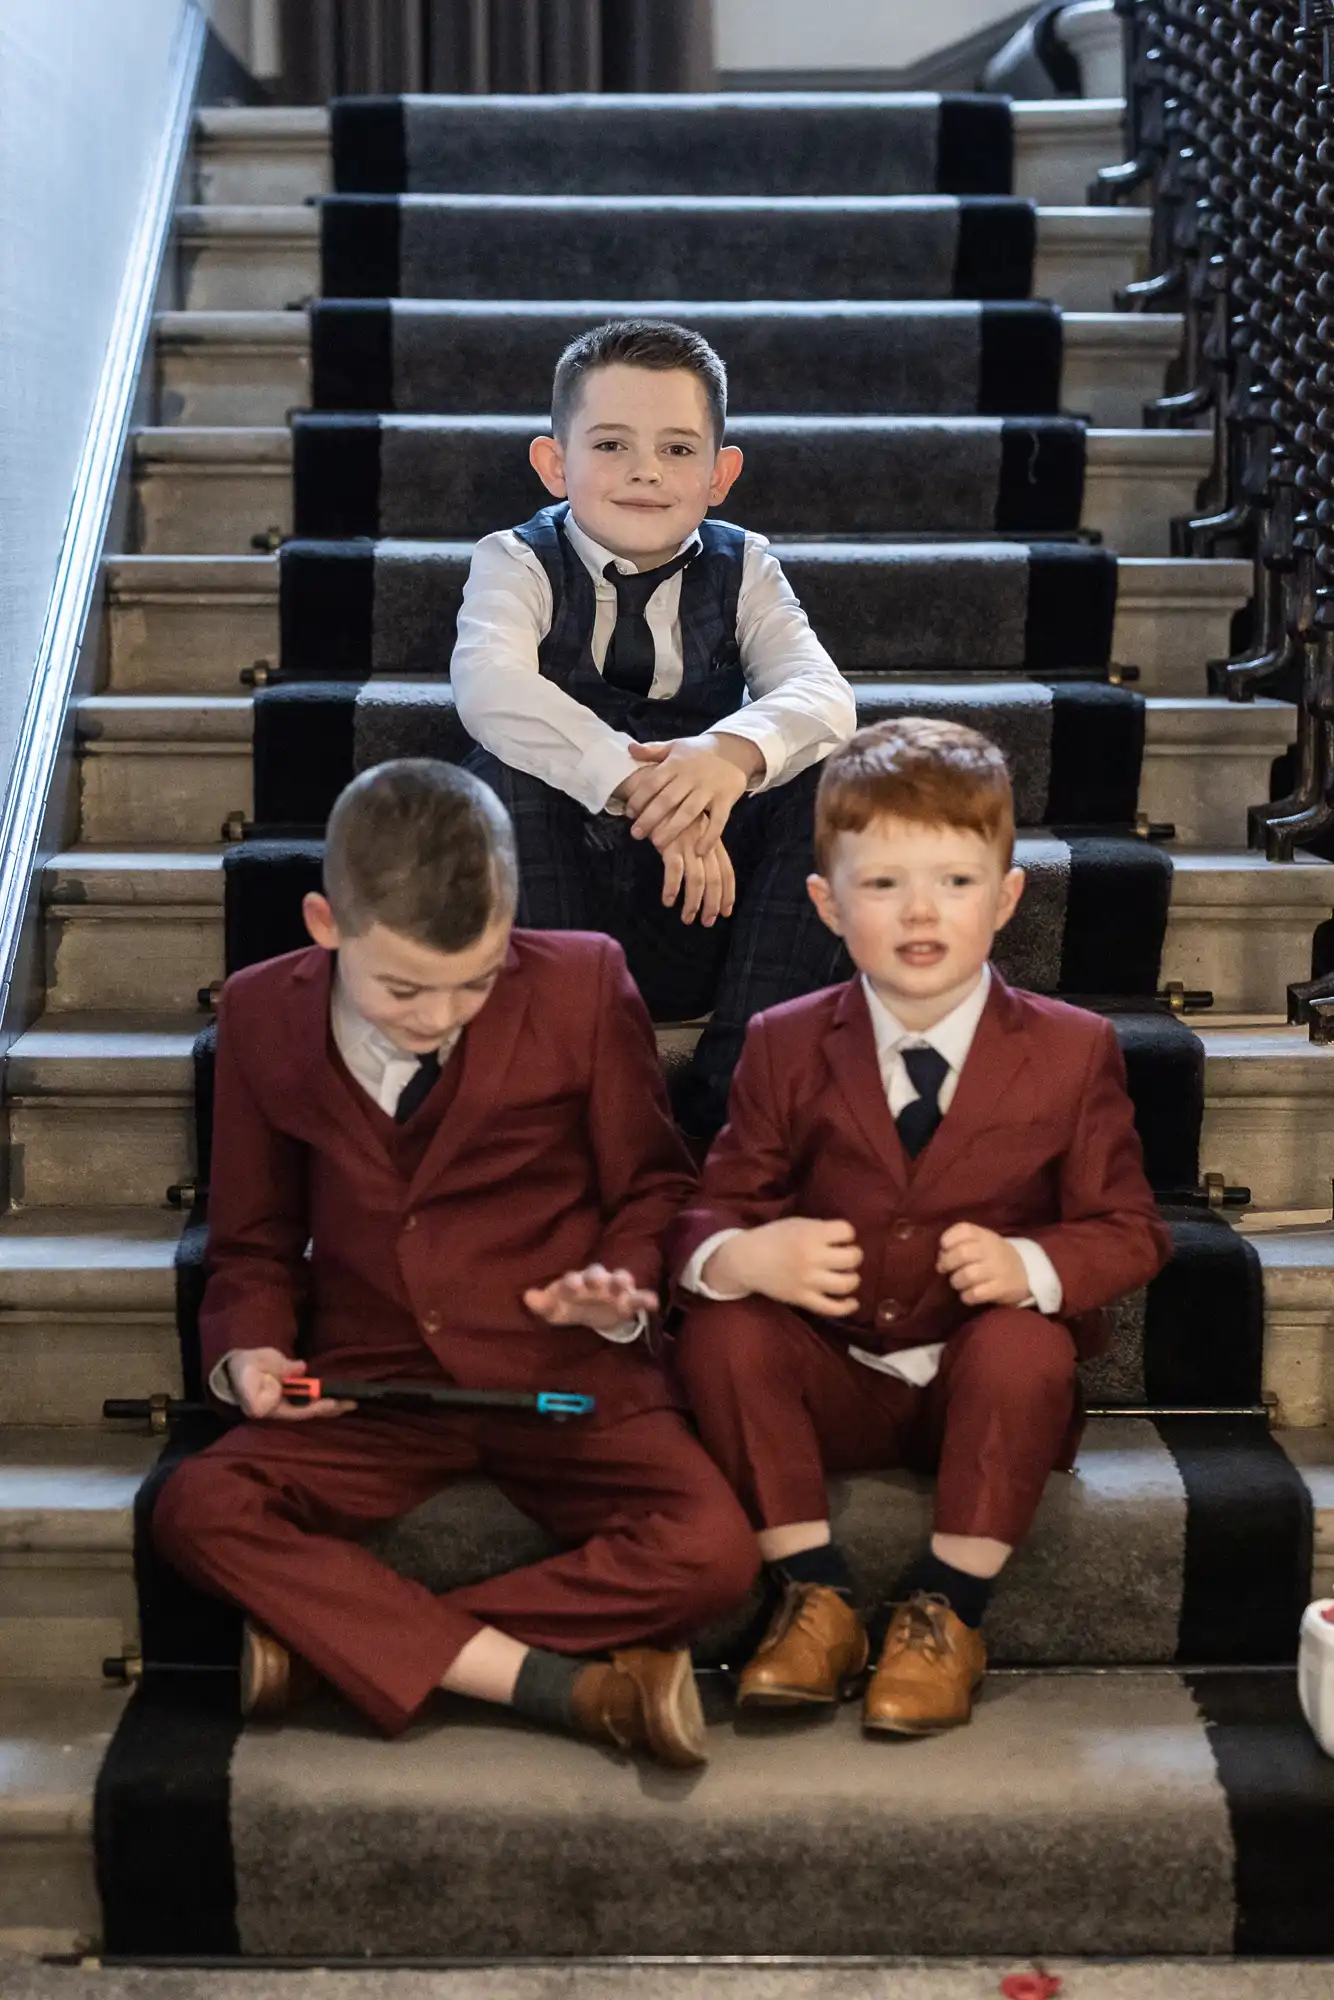 Three boys in formal wear sitting on a staircase; one in a gray vest and tie looking at the camera, two in maroon suits focused on a handheld device.